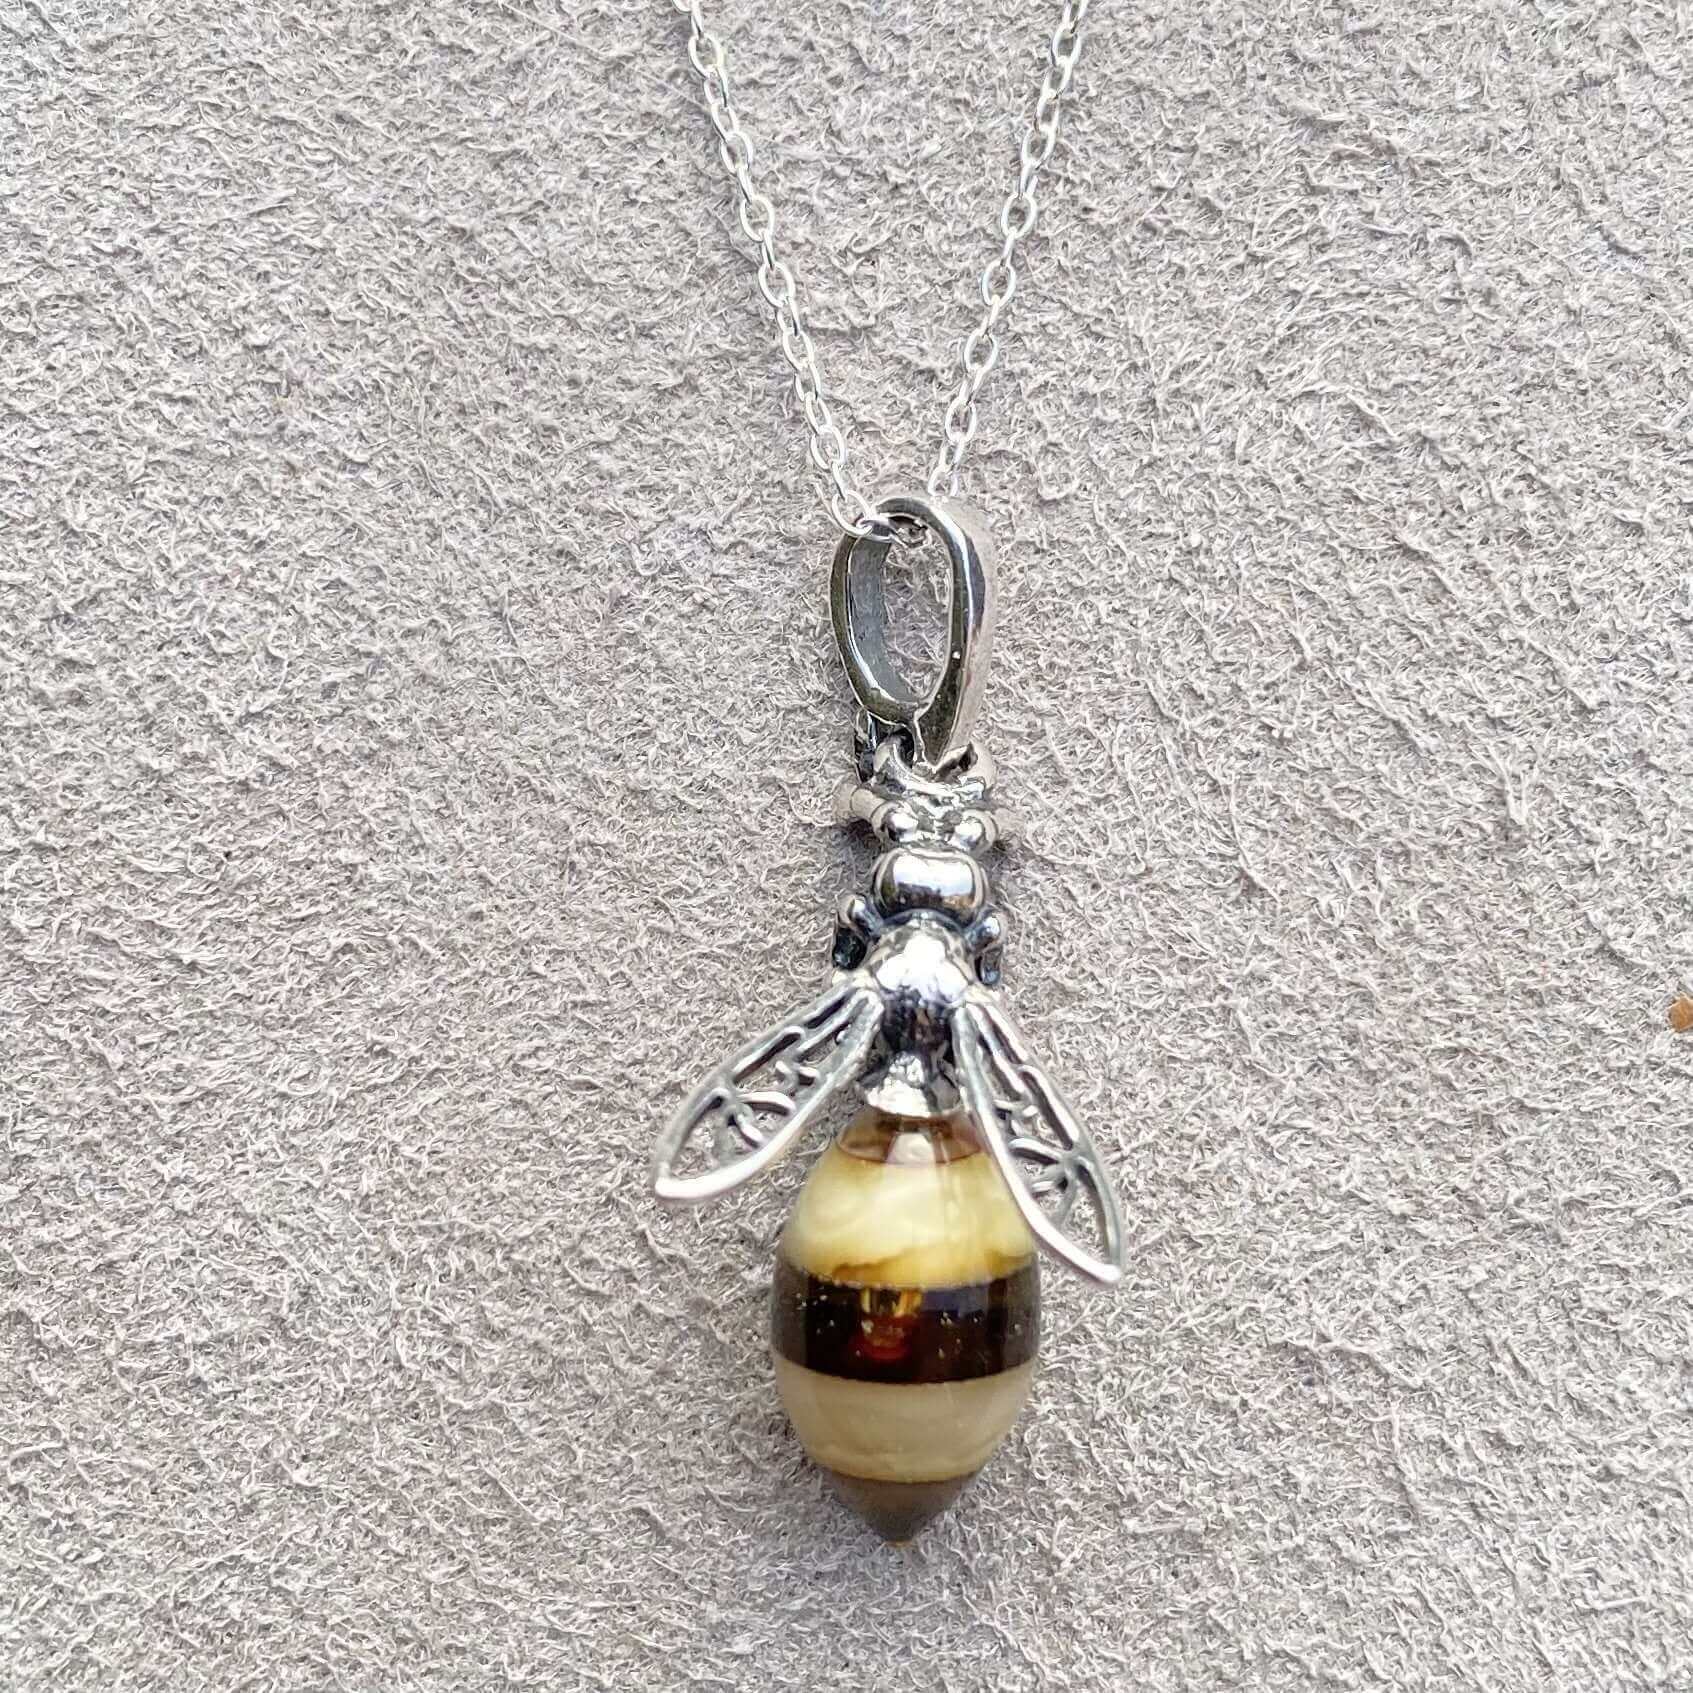 Baltic Amber Small Sterling Silver Bee Pendant - Twelve Silver Trees